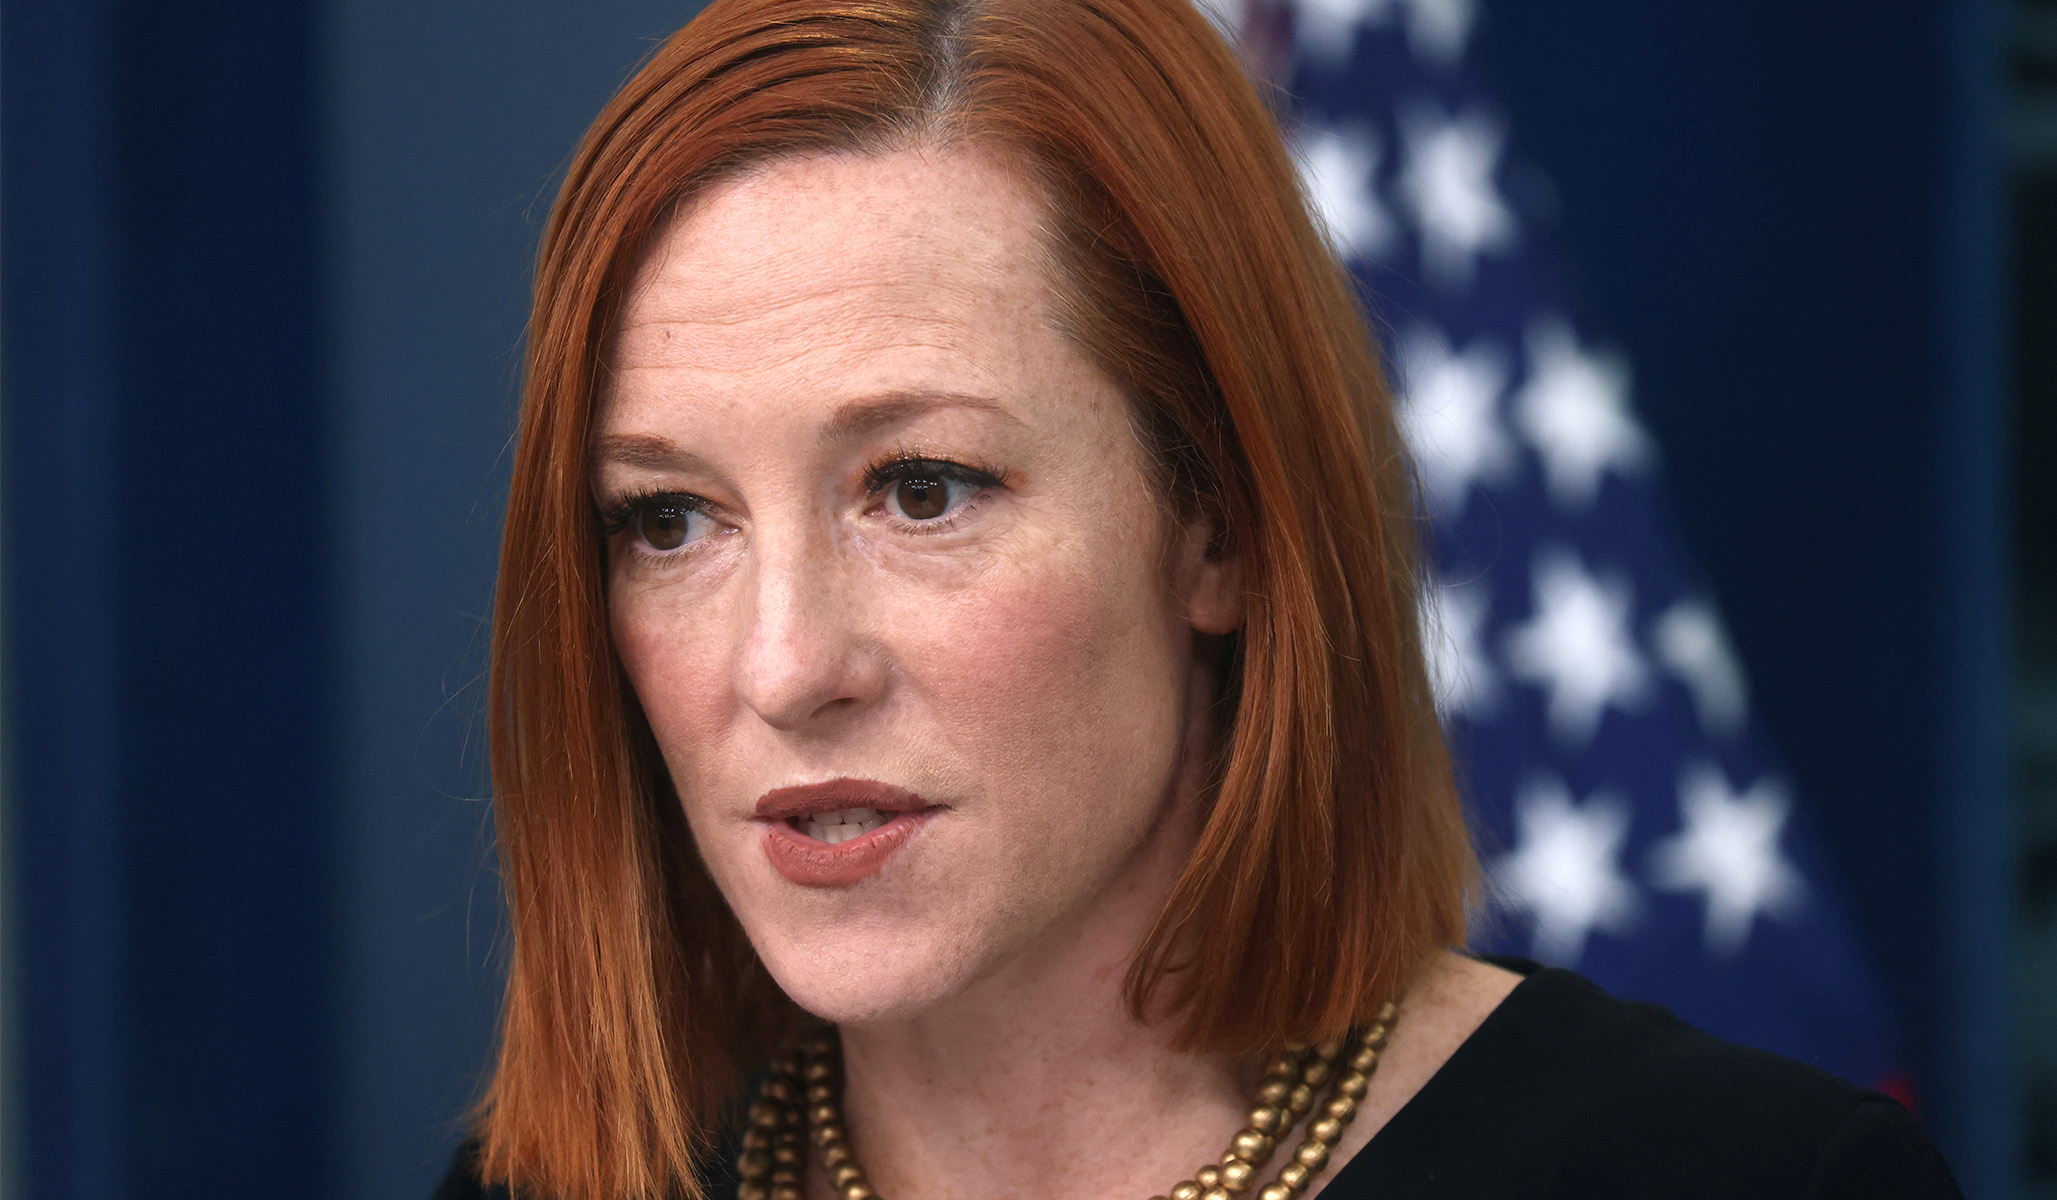 Psaki: Biden 'Certainly Stands By' Commitment to Nominating a Black Woman to Supreme Court